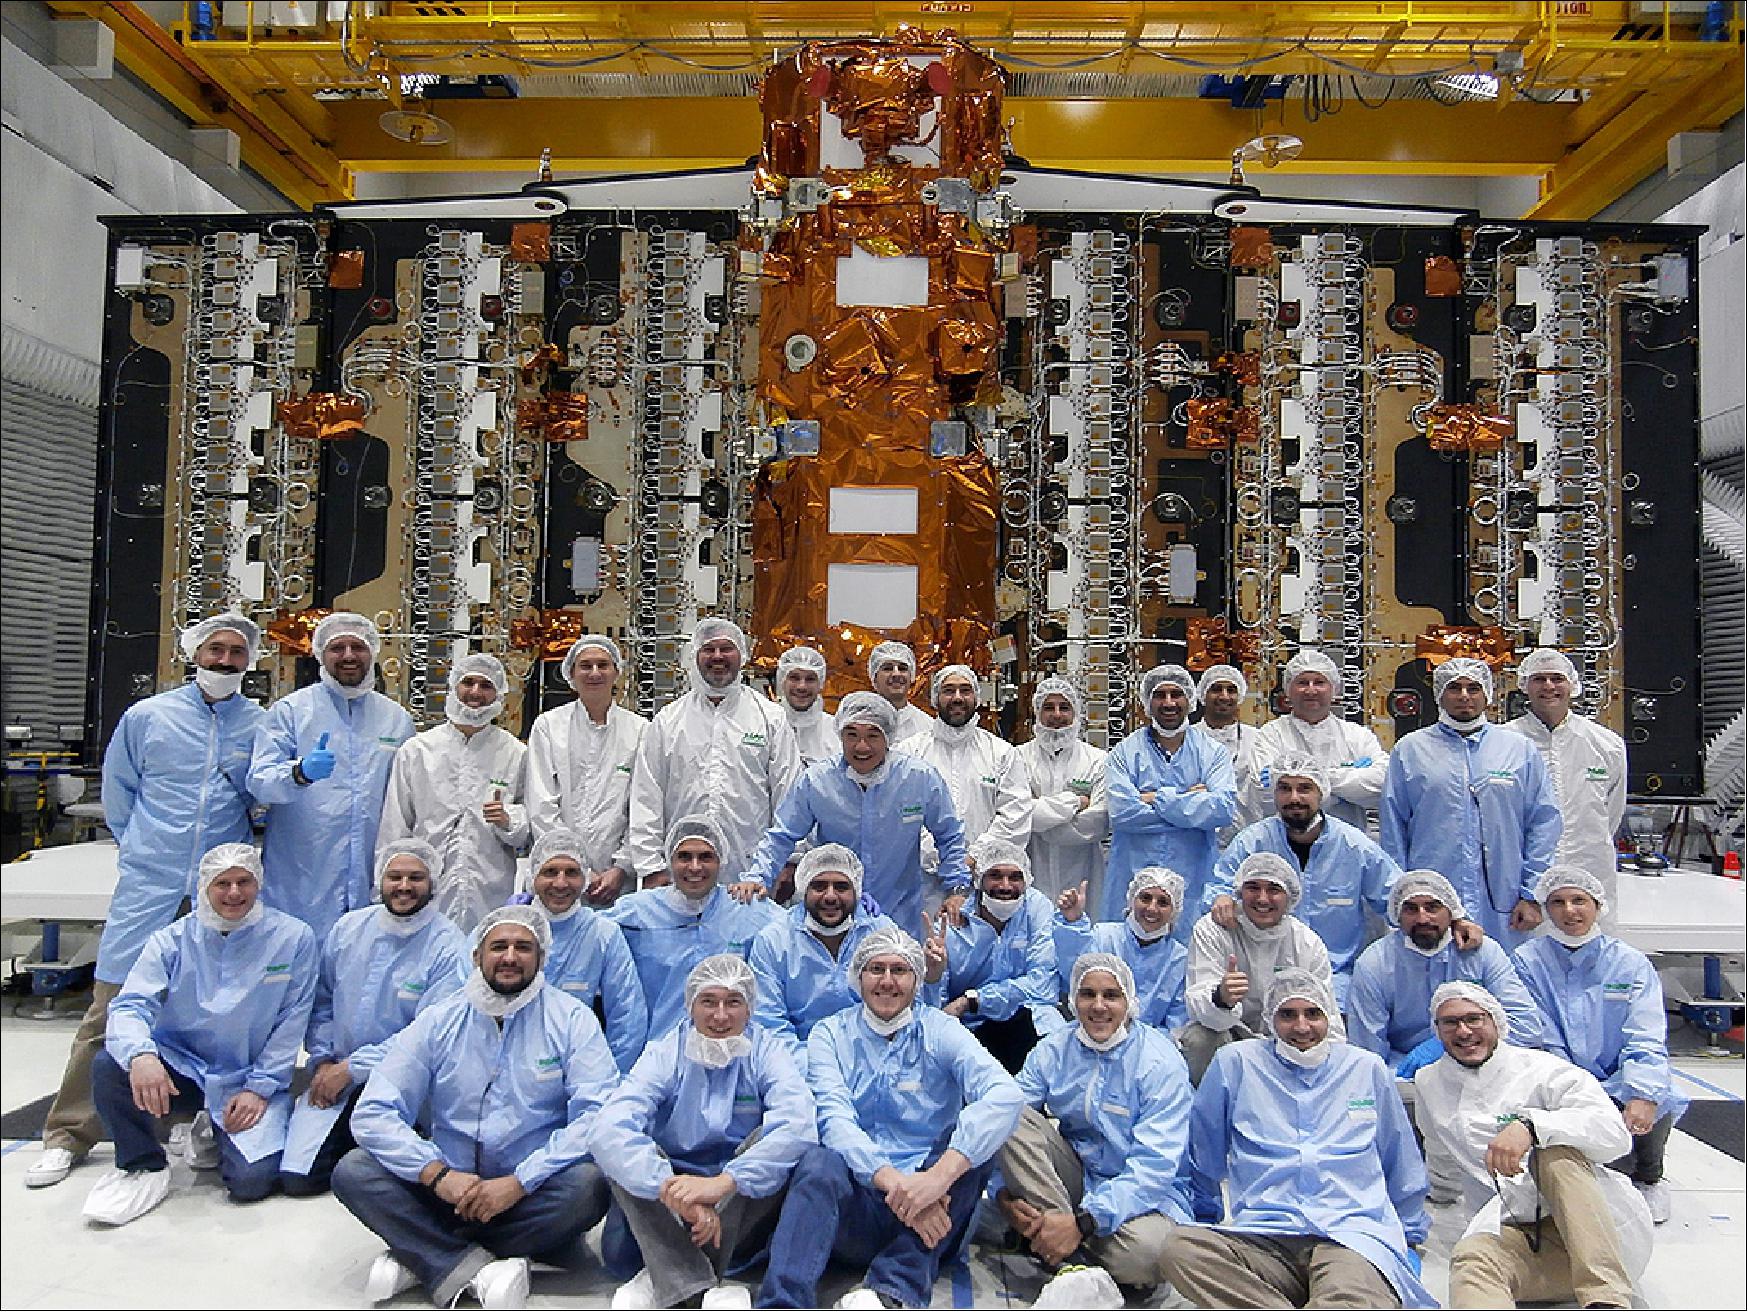 Figure 4: Photo of the SAOCOM-1A sapcecraft along with members of the integration teams (image credit: CONAE)